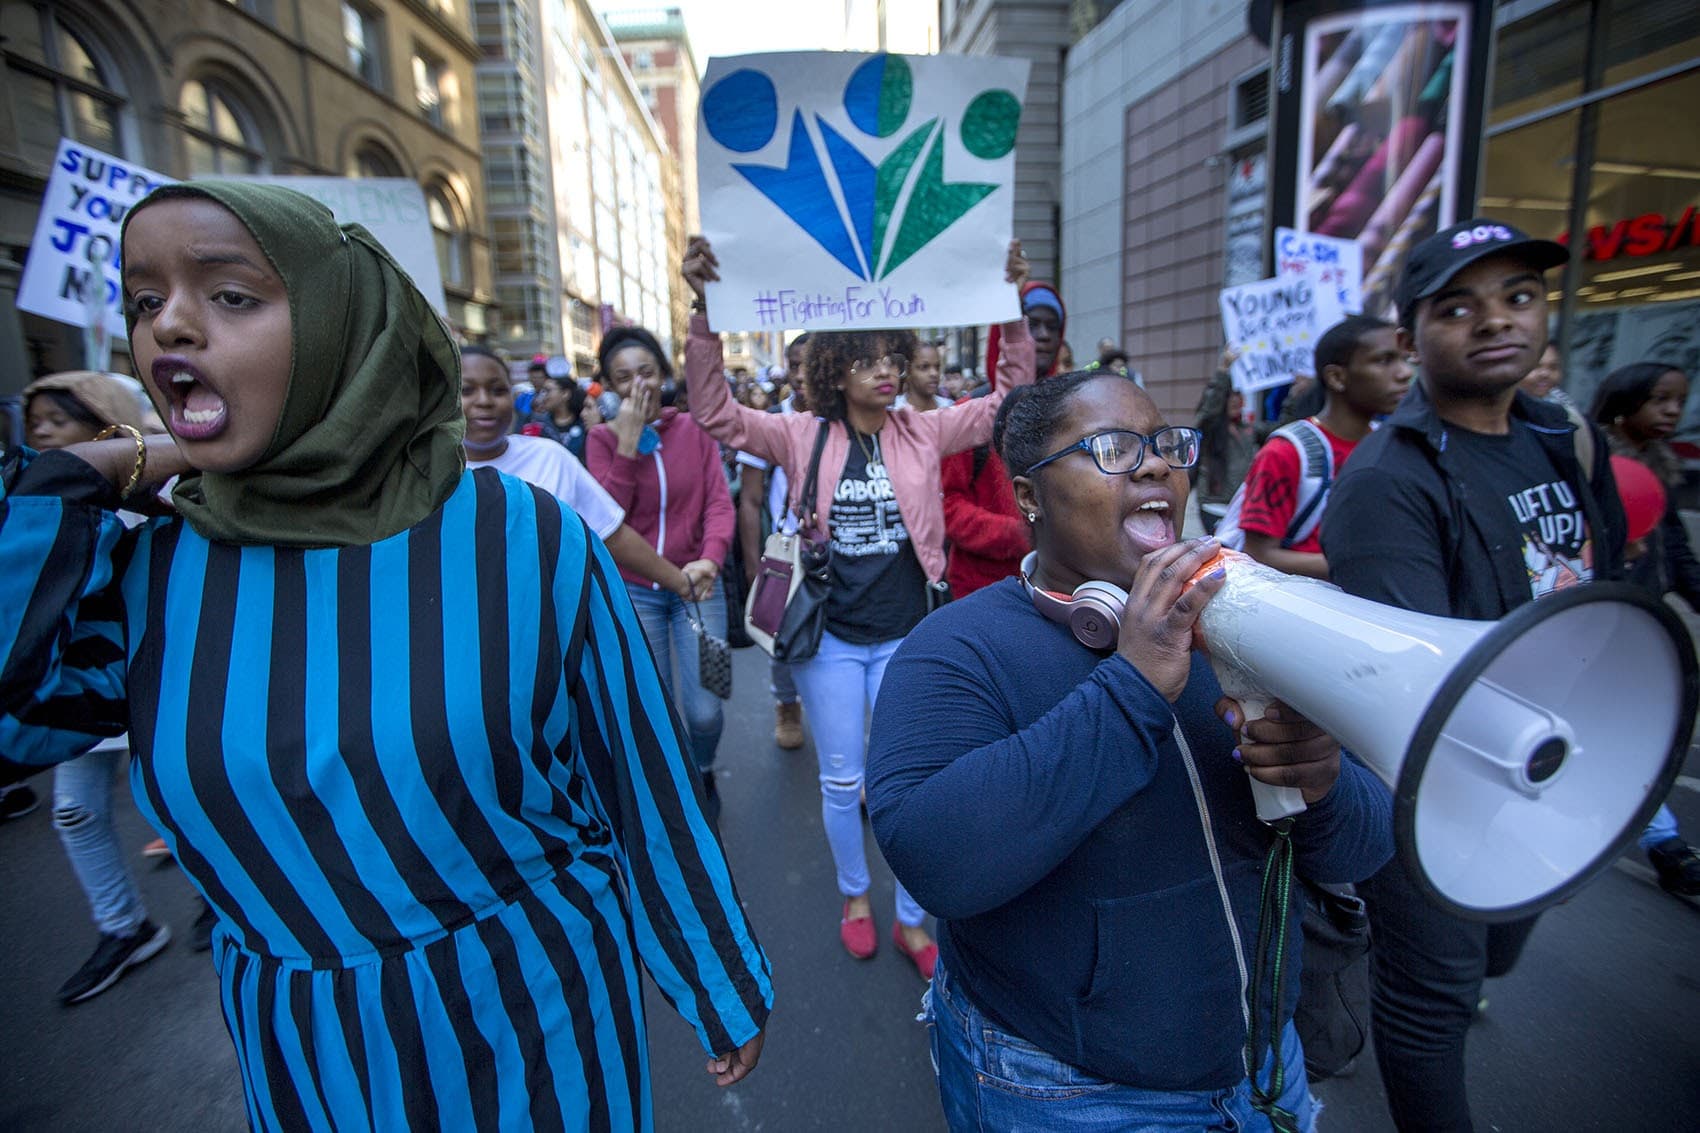 Youth activists march through Downtown Crossing Thursday afternoon. They are calling on state and city leaders to fund more youth jobs and reform the juvenile justice system. (Jesse Costa/WBUR)